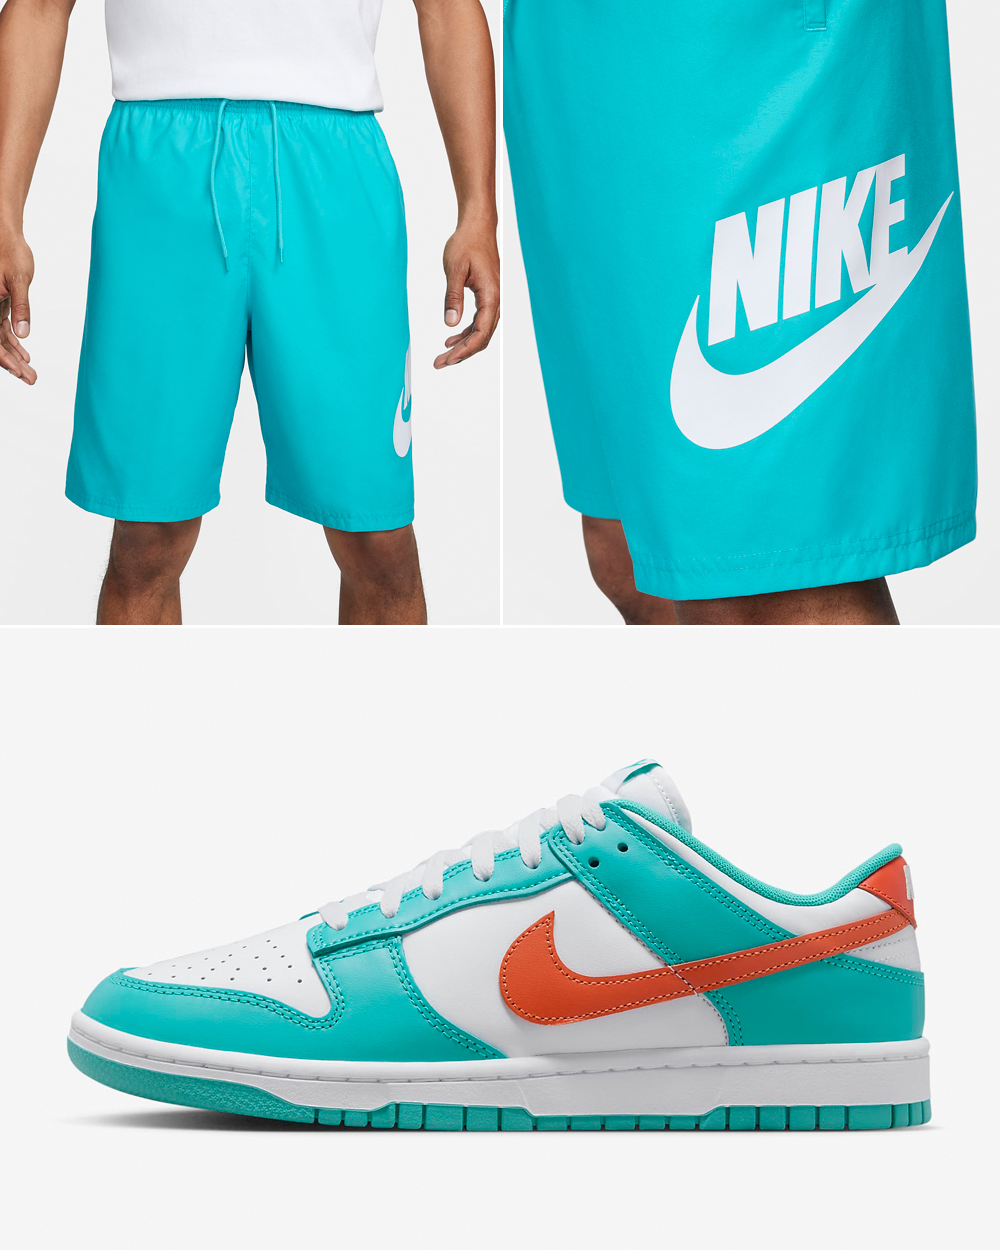 Nike Dunk Low Miami Dolphins Shorts Matching Outfit